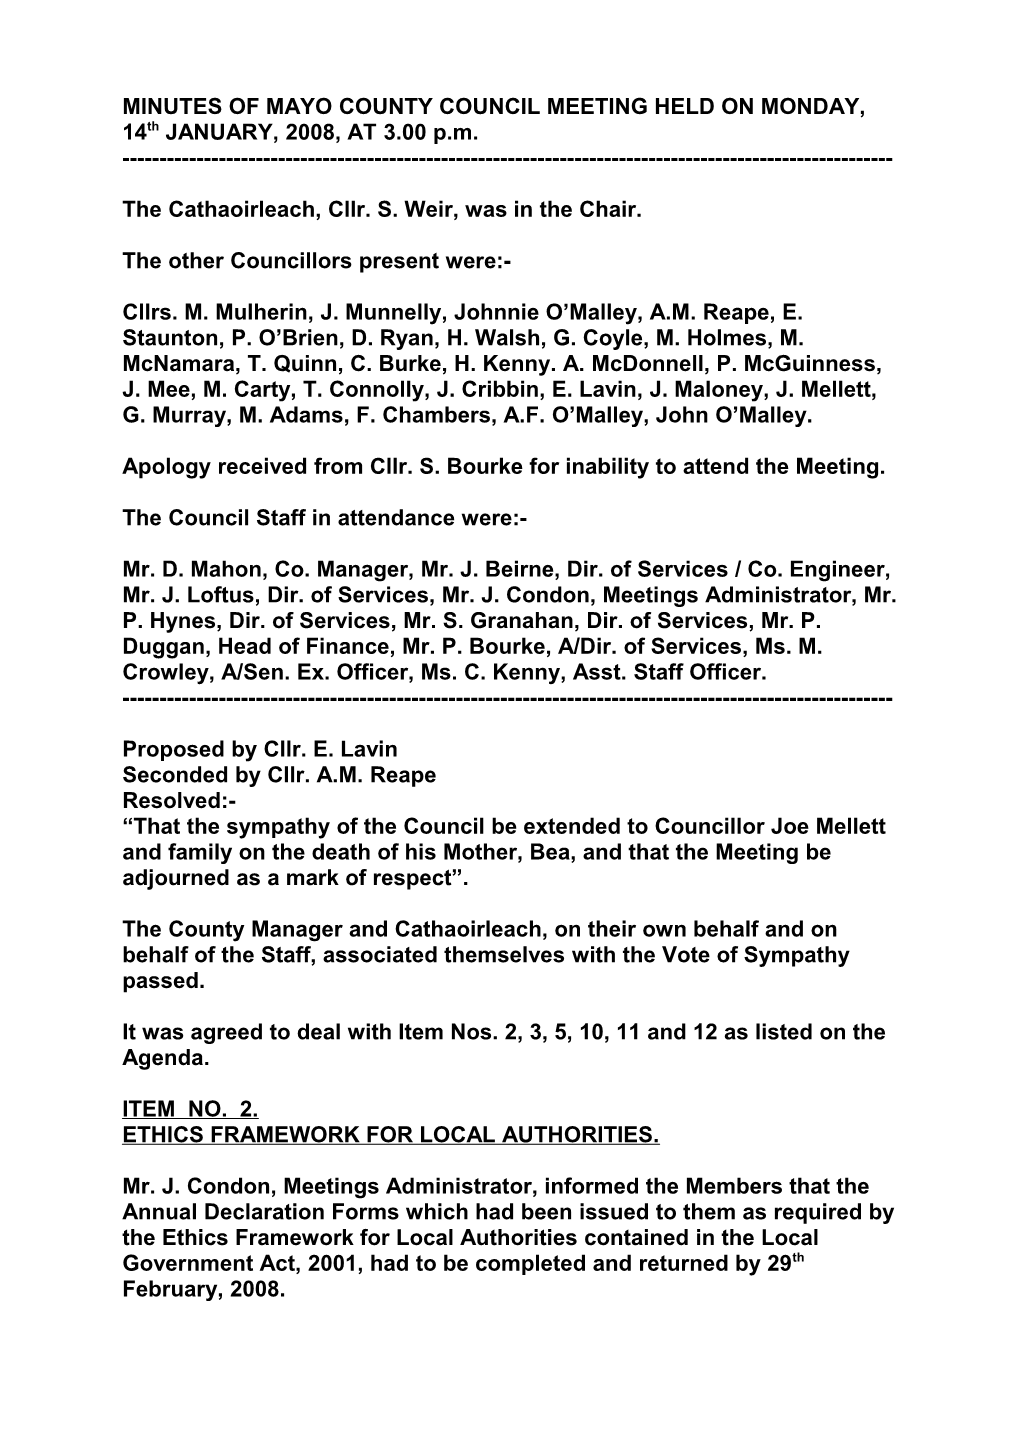 MINUTES of MAYO COUNTY COUNCIL MEETING HELD on MONDAY, 14Th JANUARY, 2008, at 3